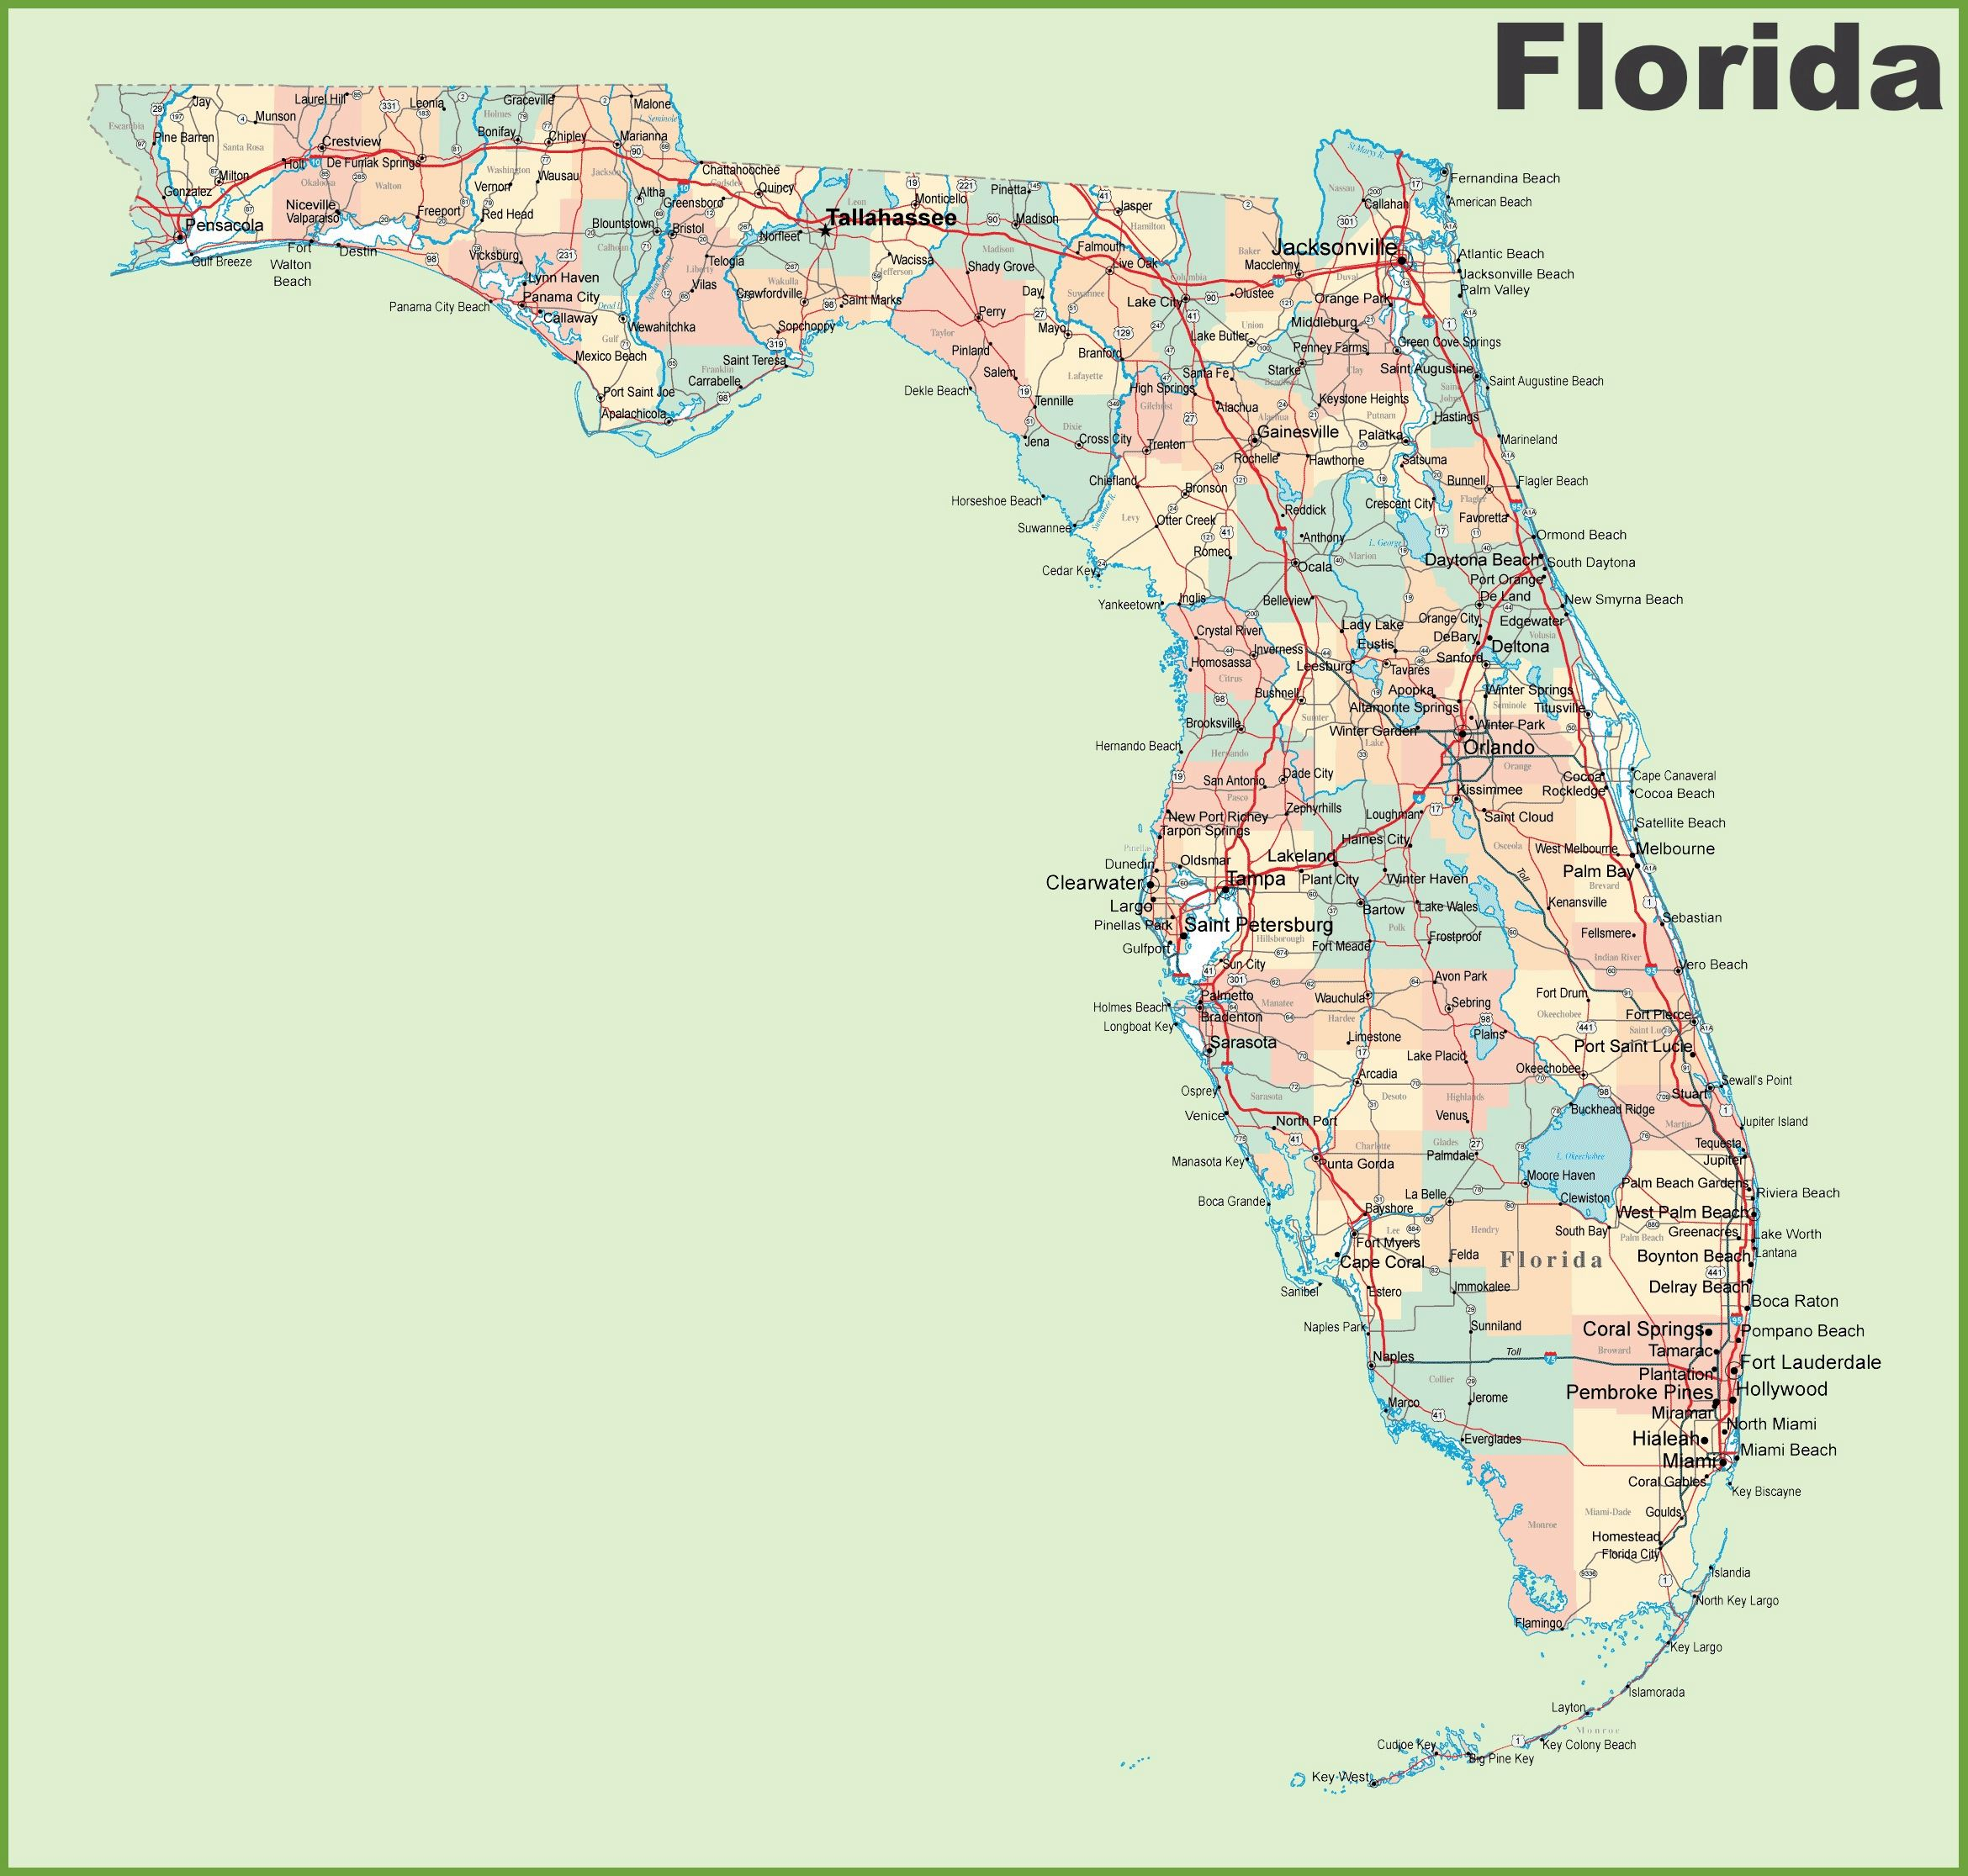 Large Florida Maps For Free Download And Print | High-Resolution And - Florida Casinos Map